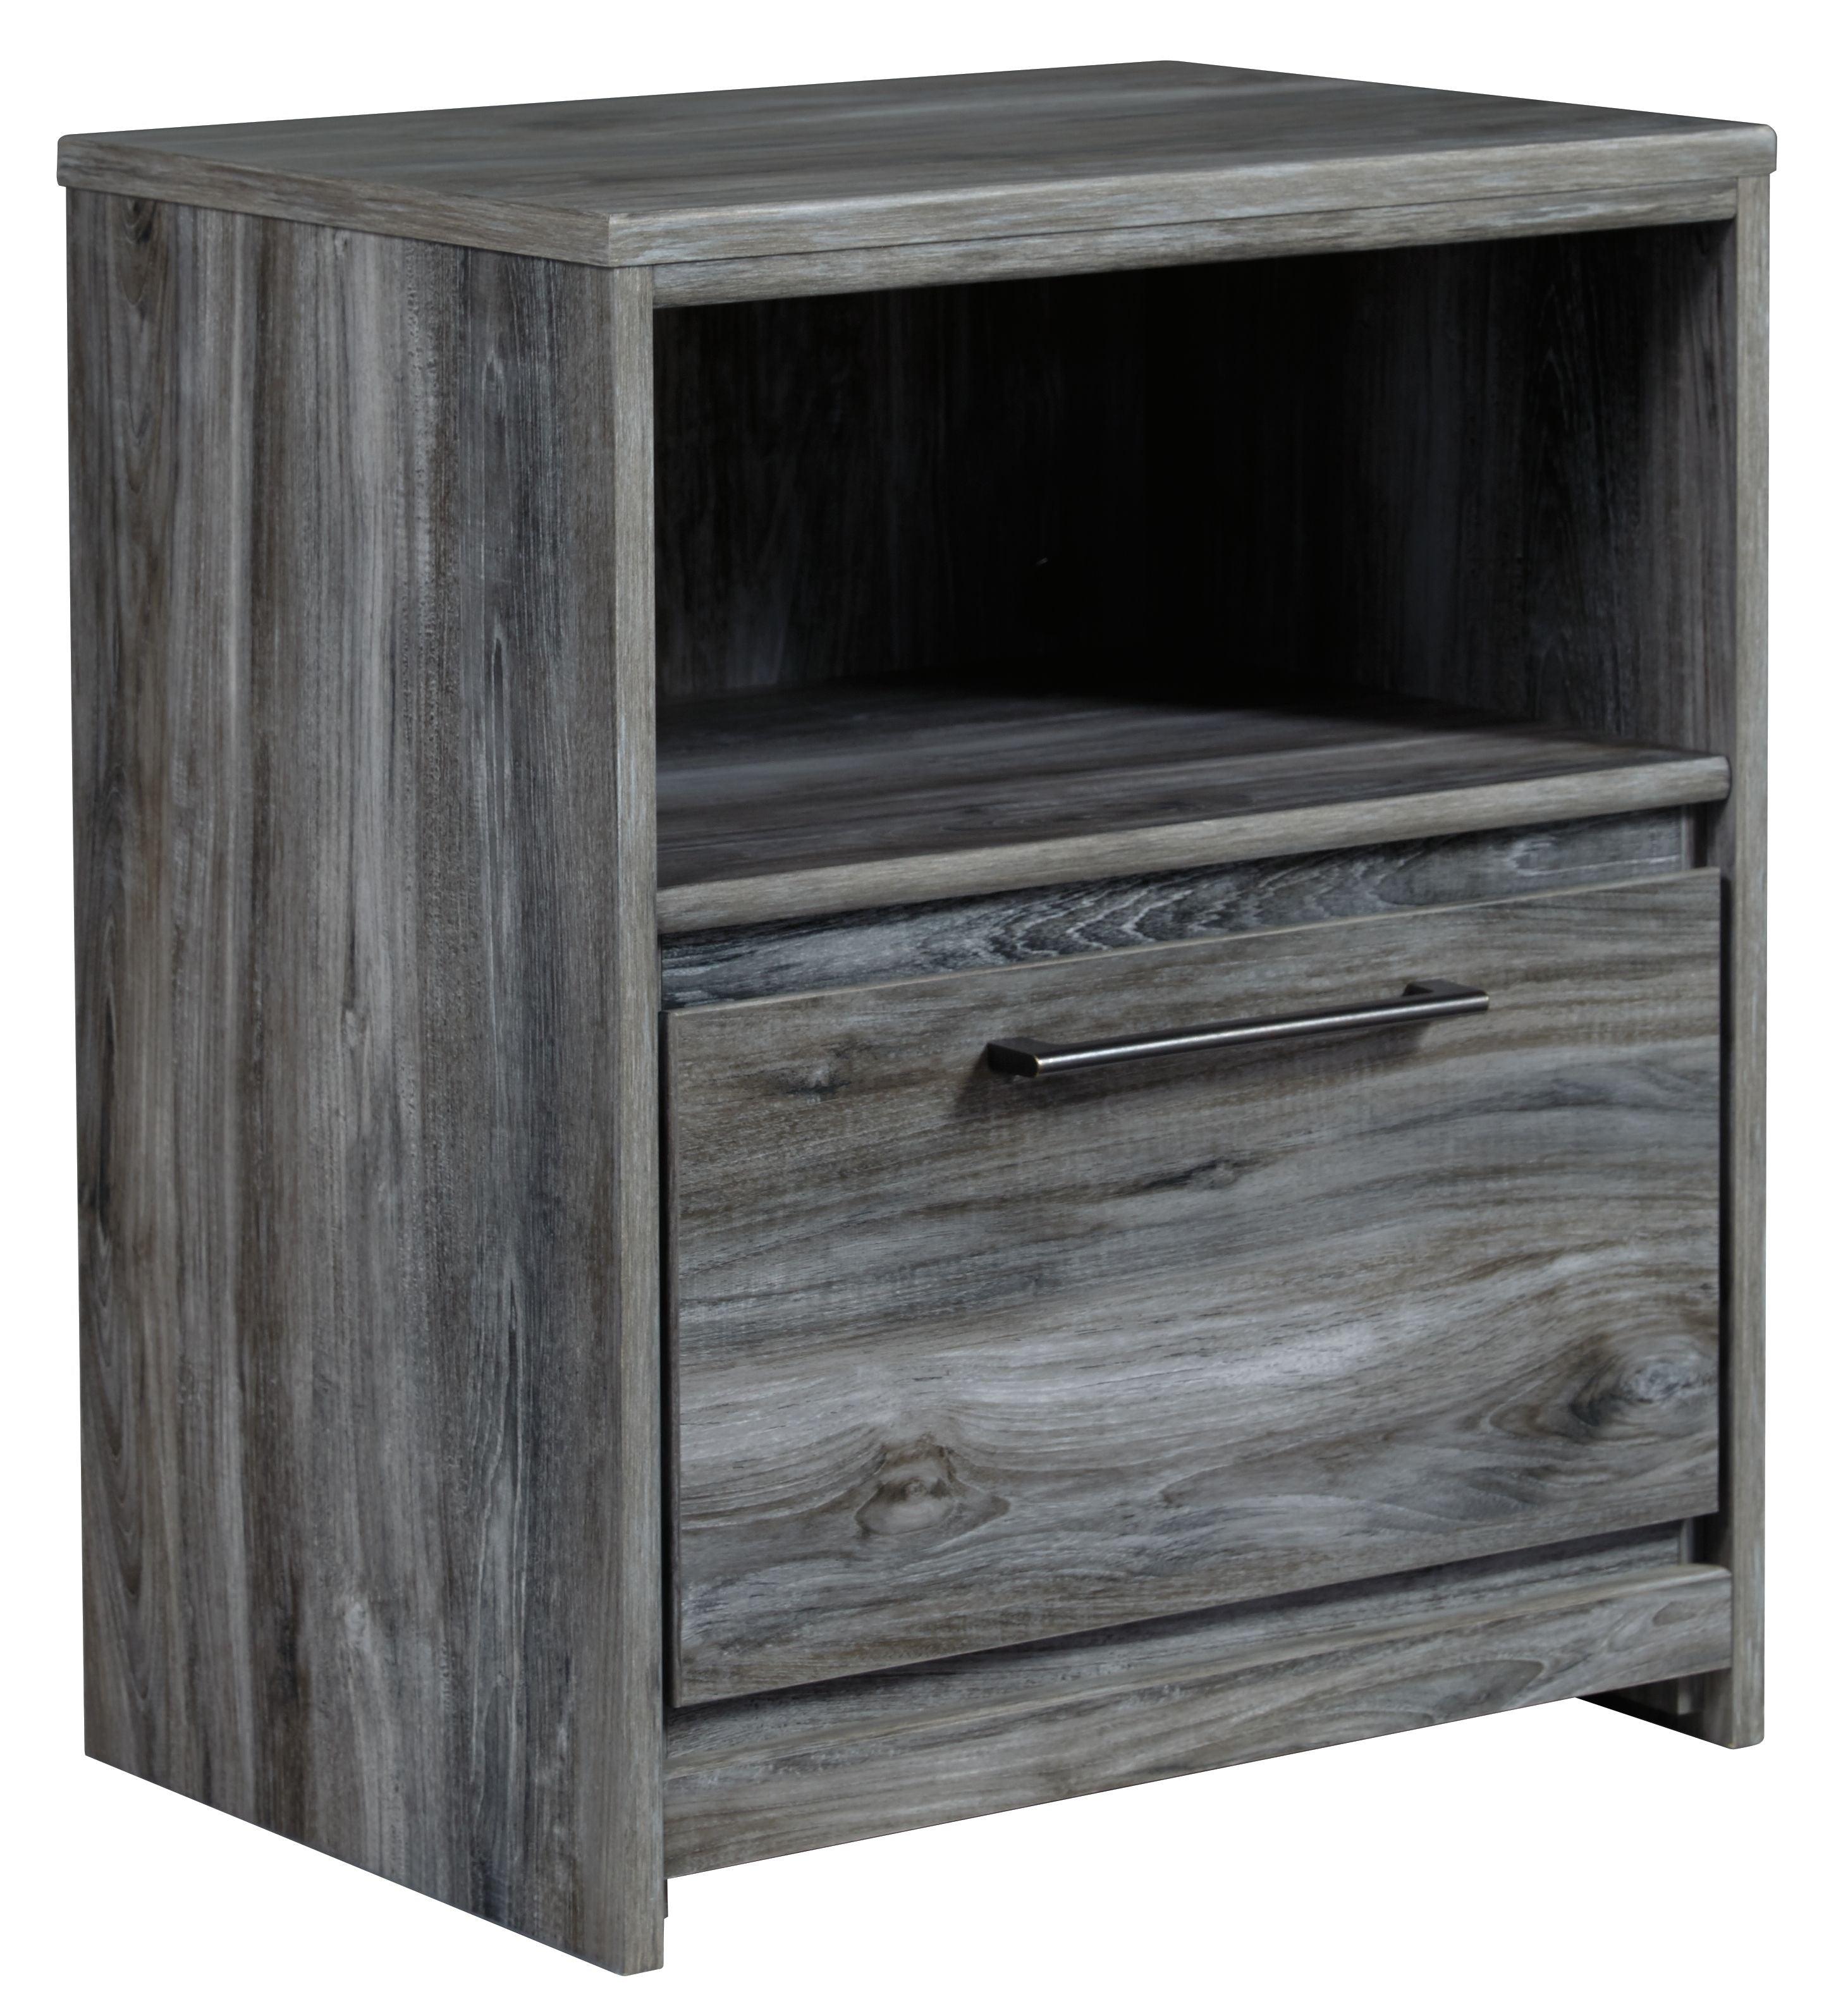 Ashley Furniture - Baystorm - Gray - One Drawer Night Stand - 5th Avenue Furniture